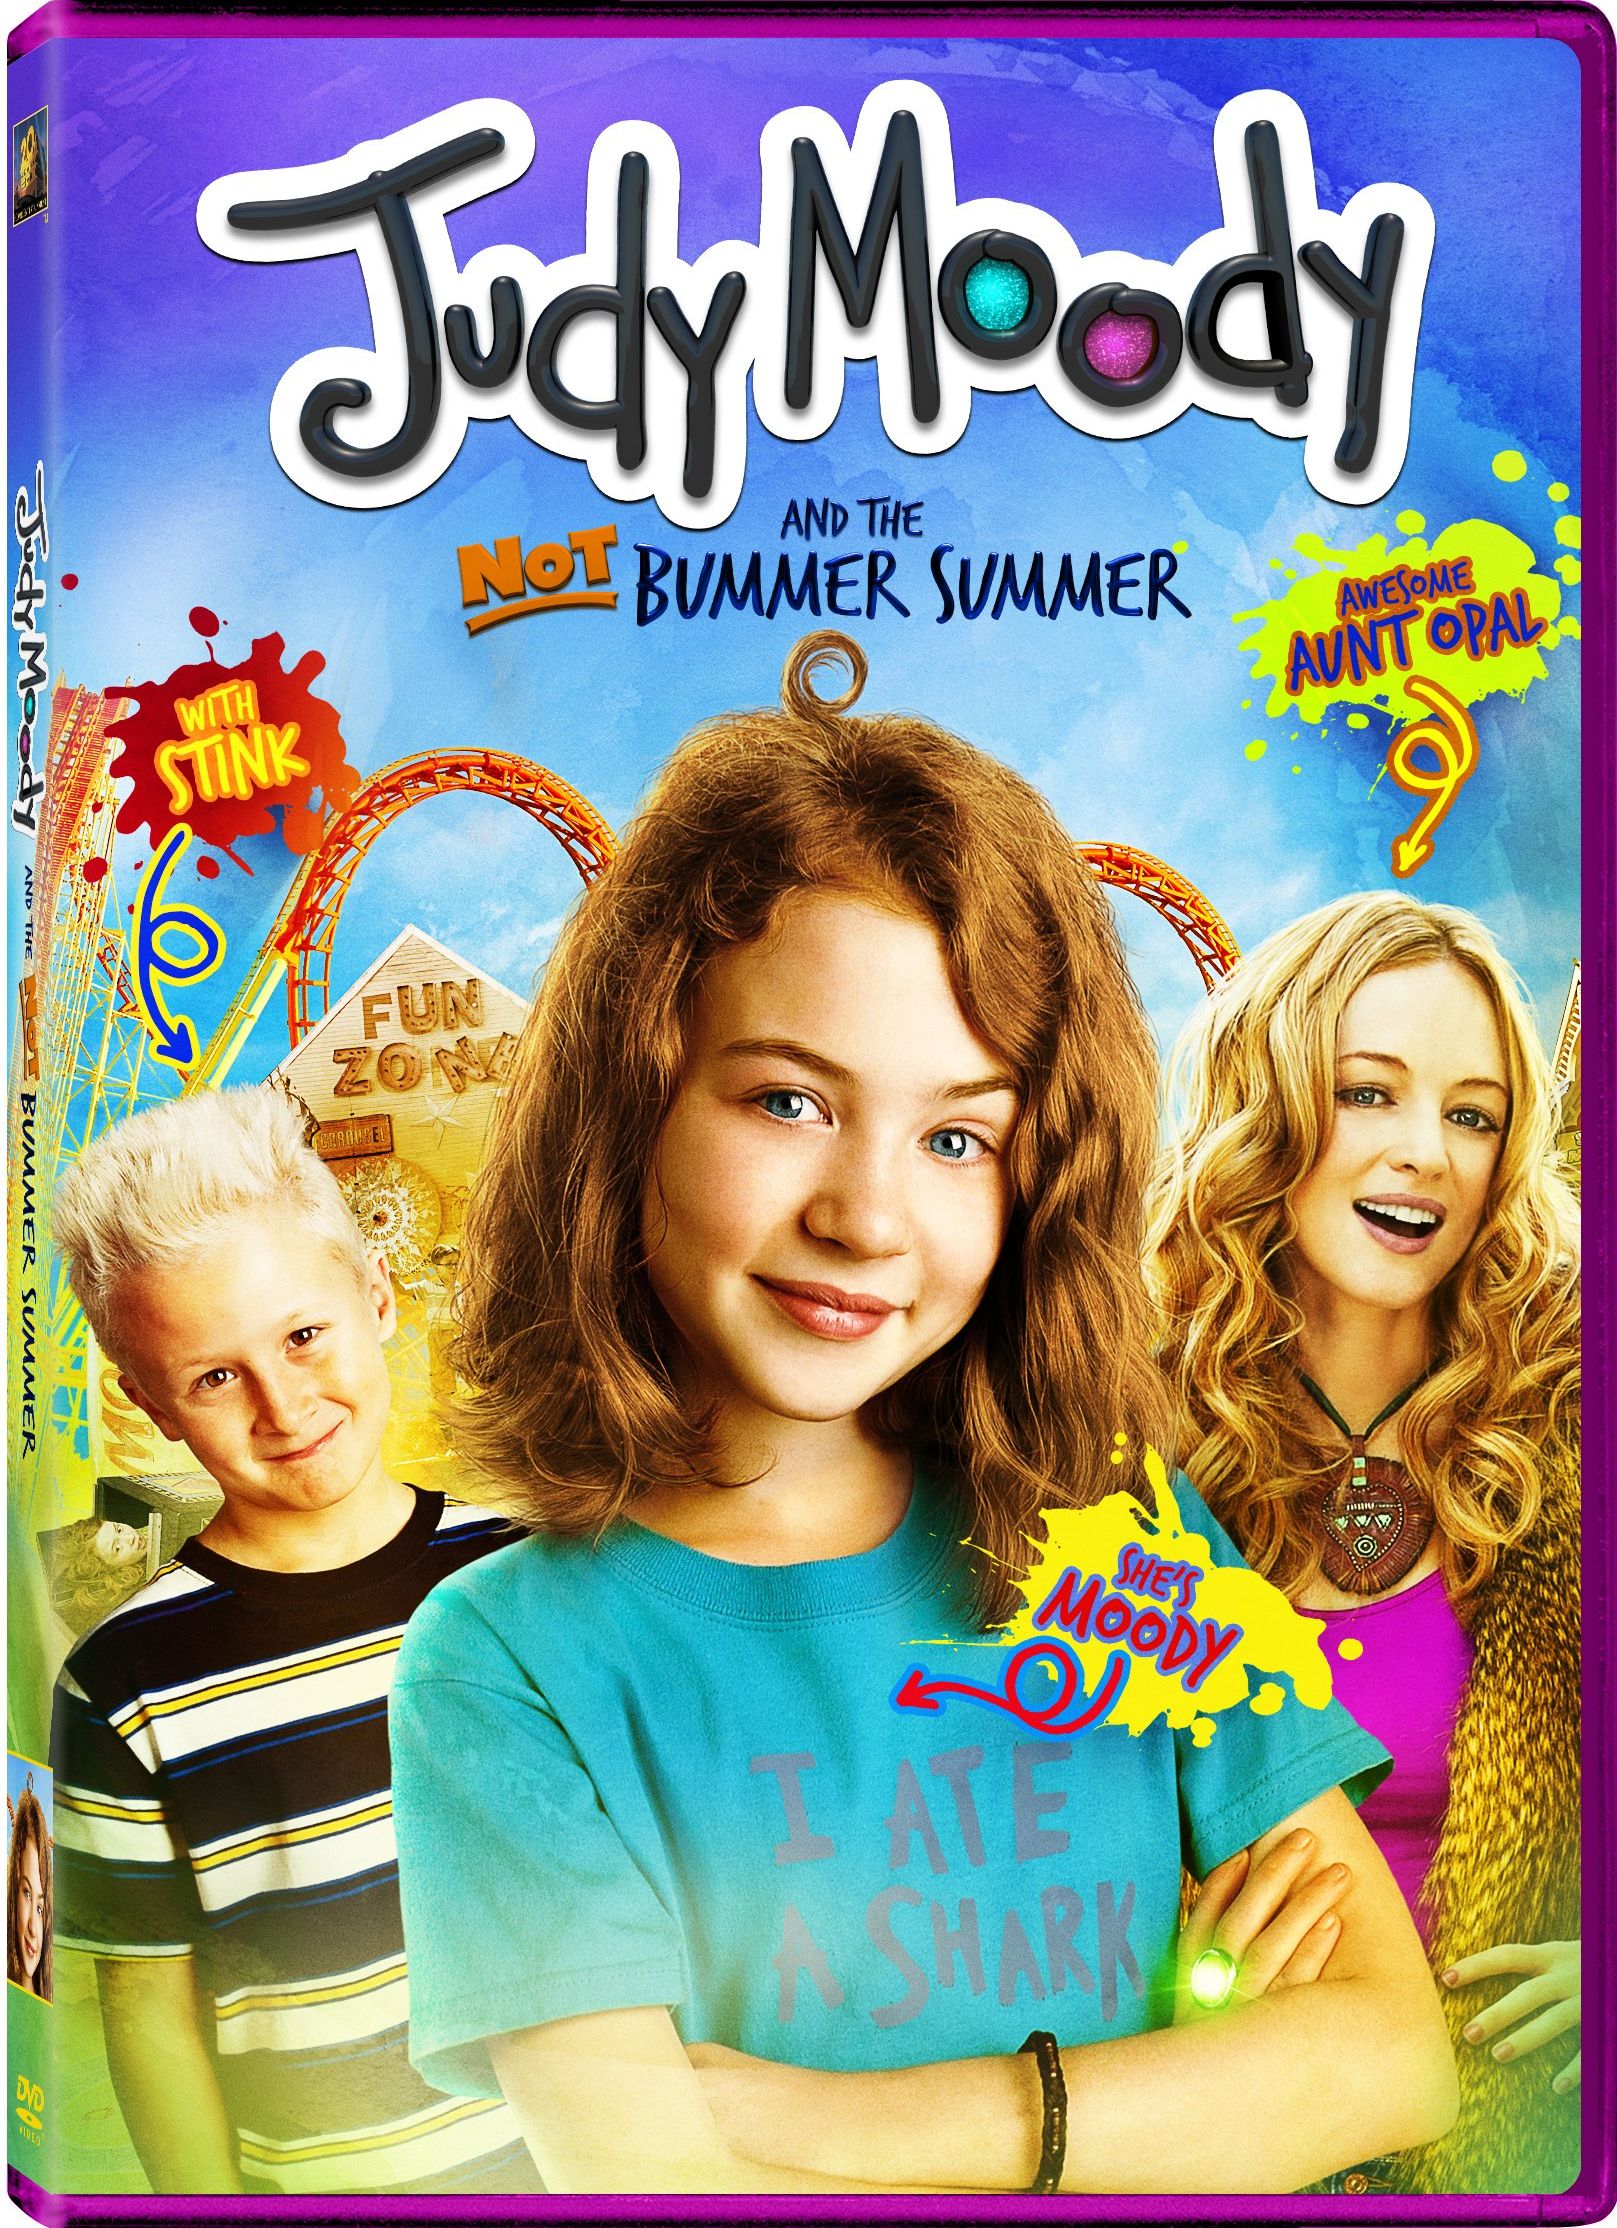 Judy Moody and the Not Bummer Summer DVD Release Date October 11, 2011